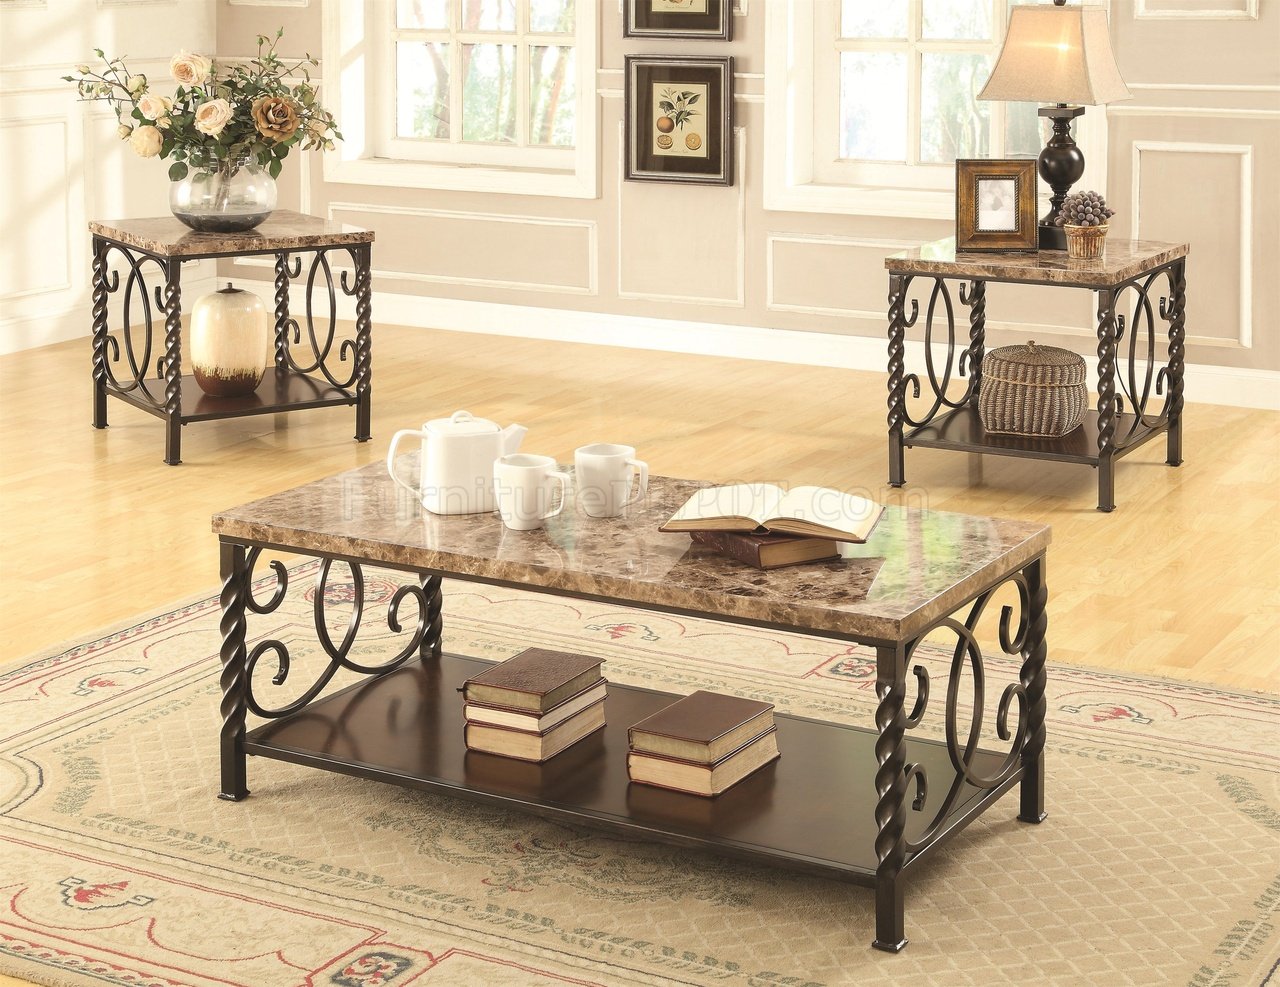 Awesome 3 piece faux marble coffee table set 701695 Coffee Table 3pc Set By Coaster W Faux Marble Top